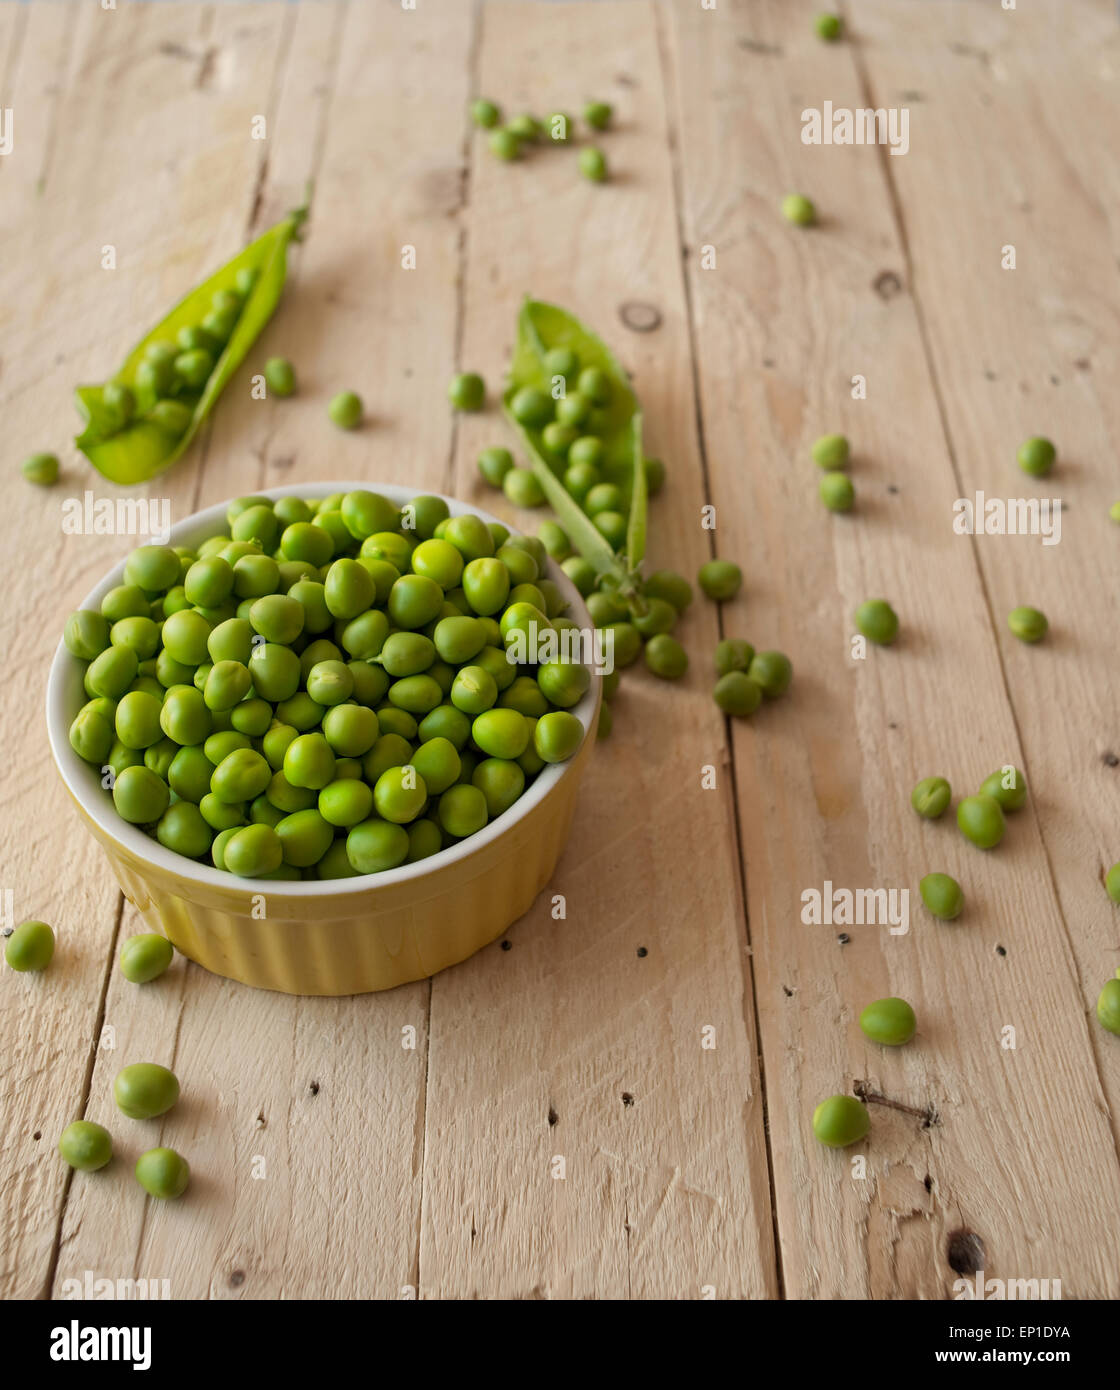 Ecological fresh green peas pods in a wooden rustic table. Stock Photo